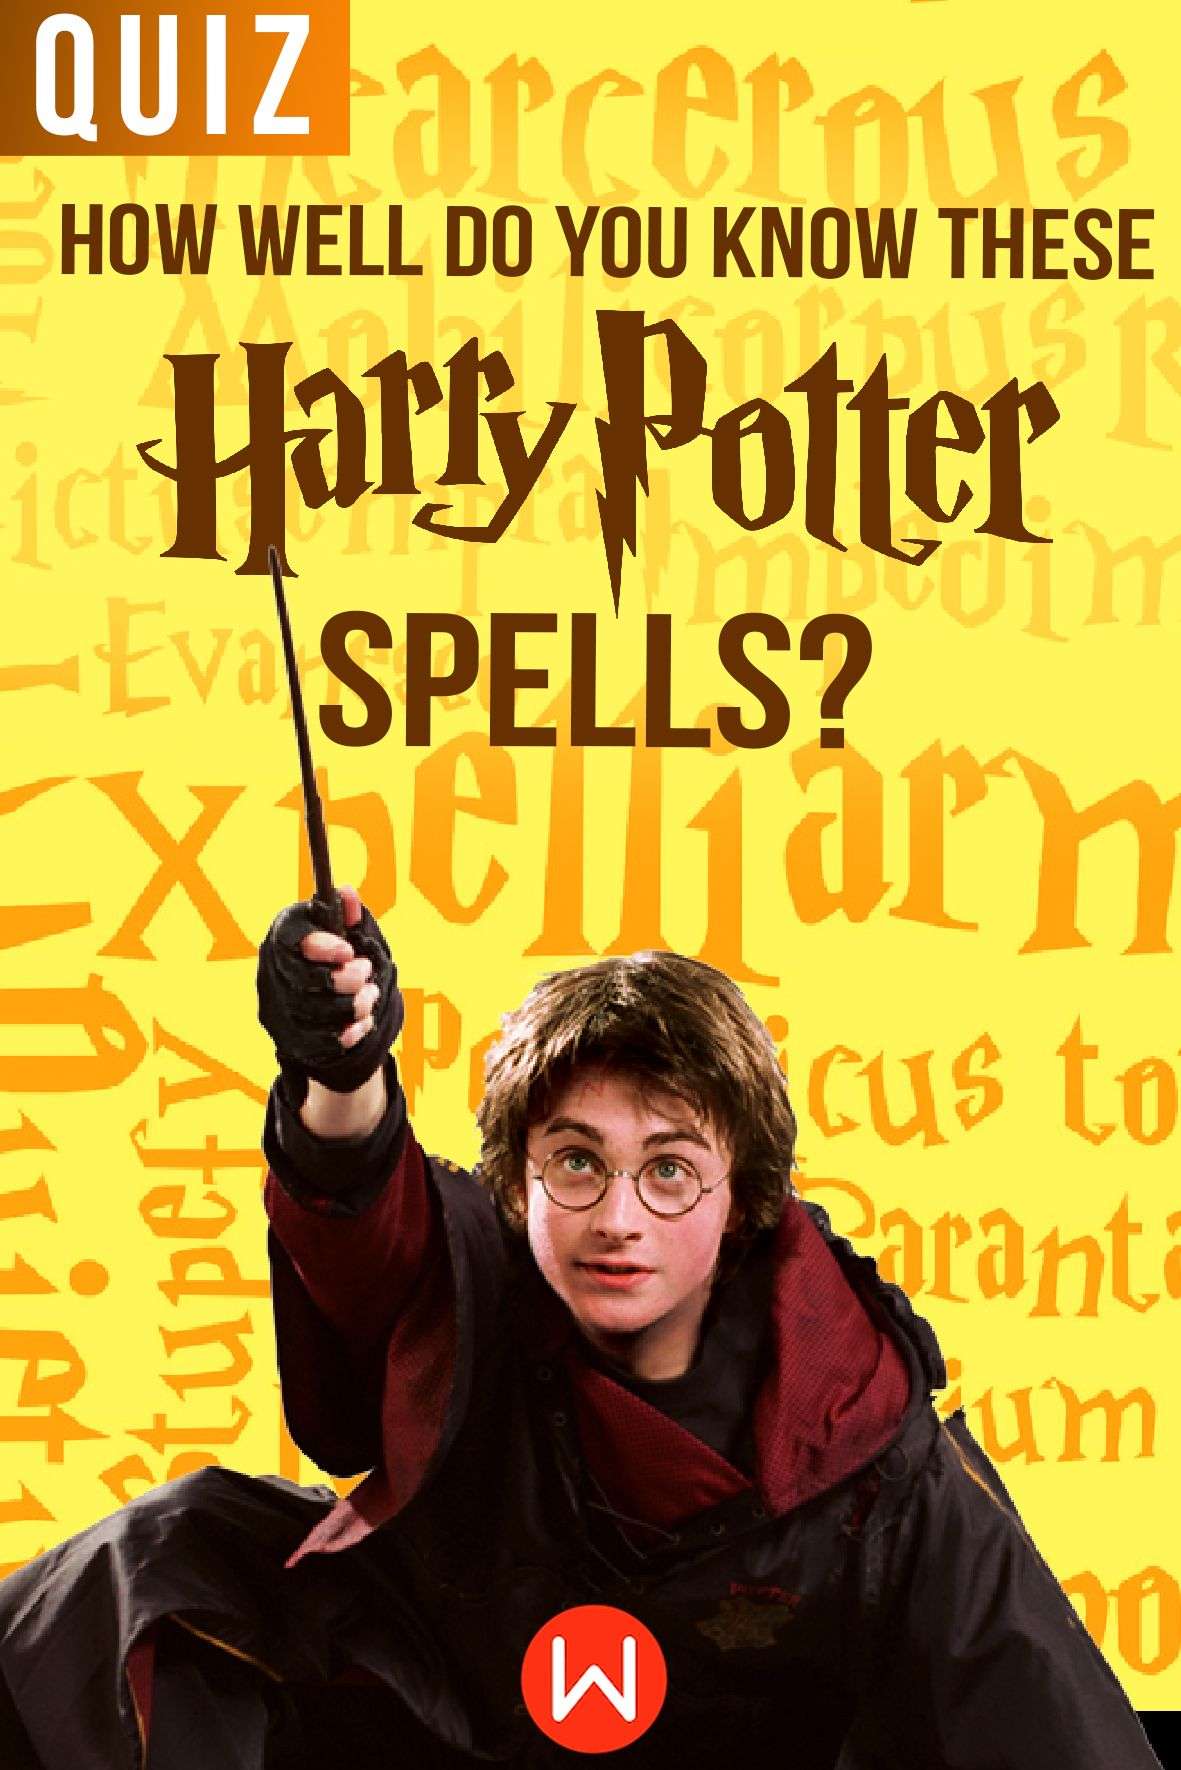 Quiz: How Well Do You Know These Harry Potter Spells?